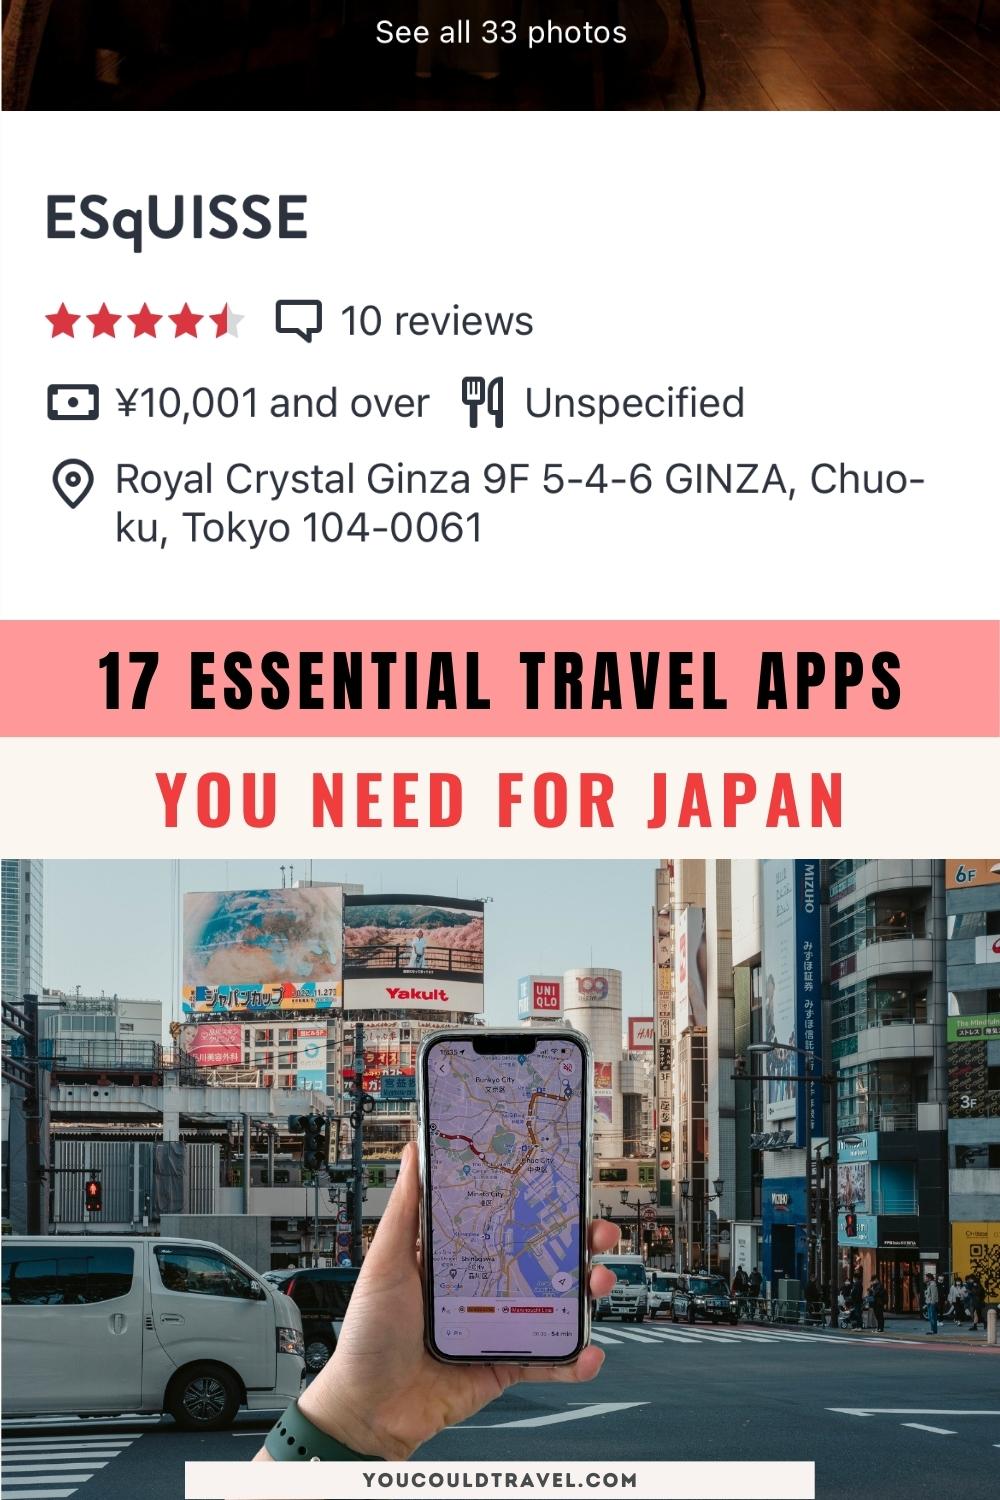 Essential travel apps for Japan